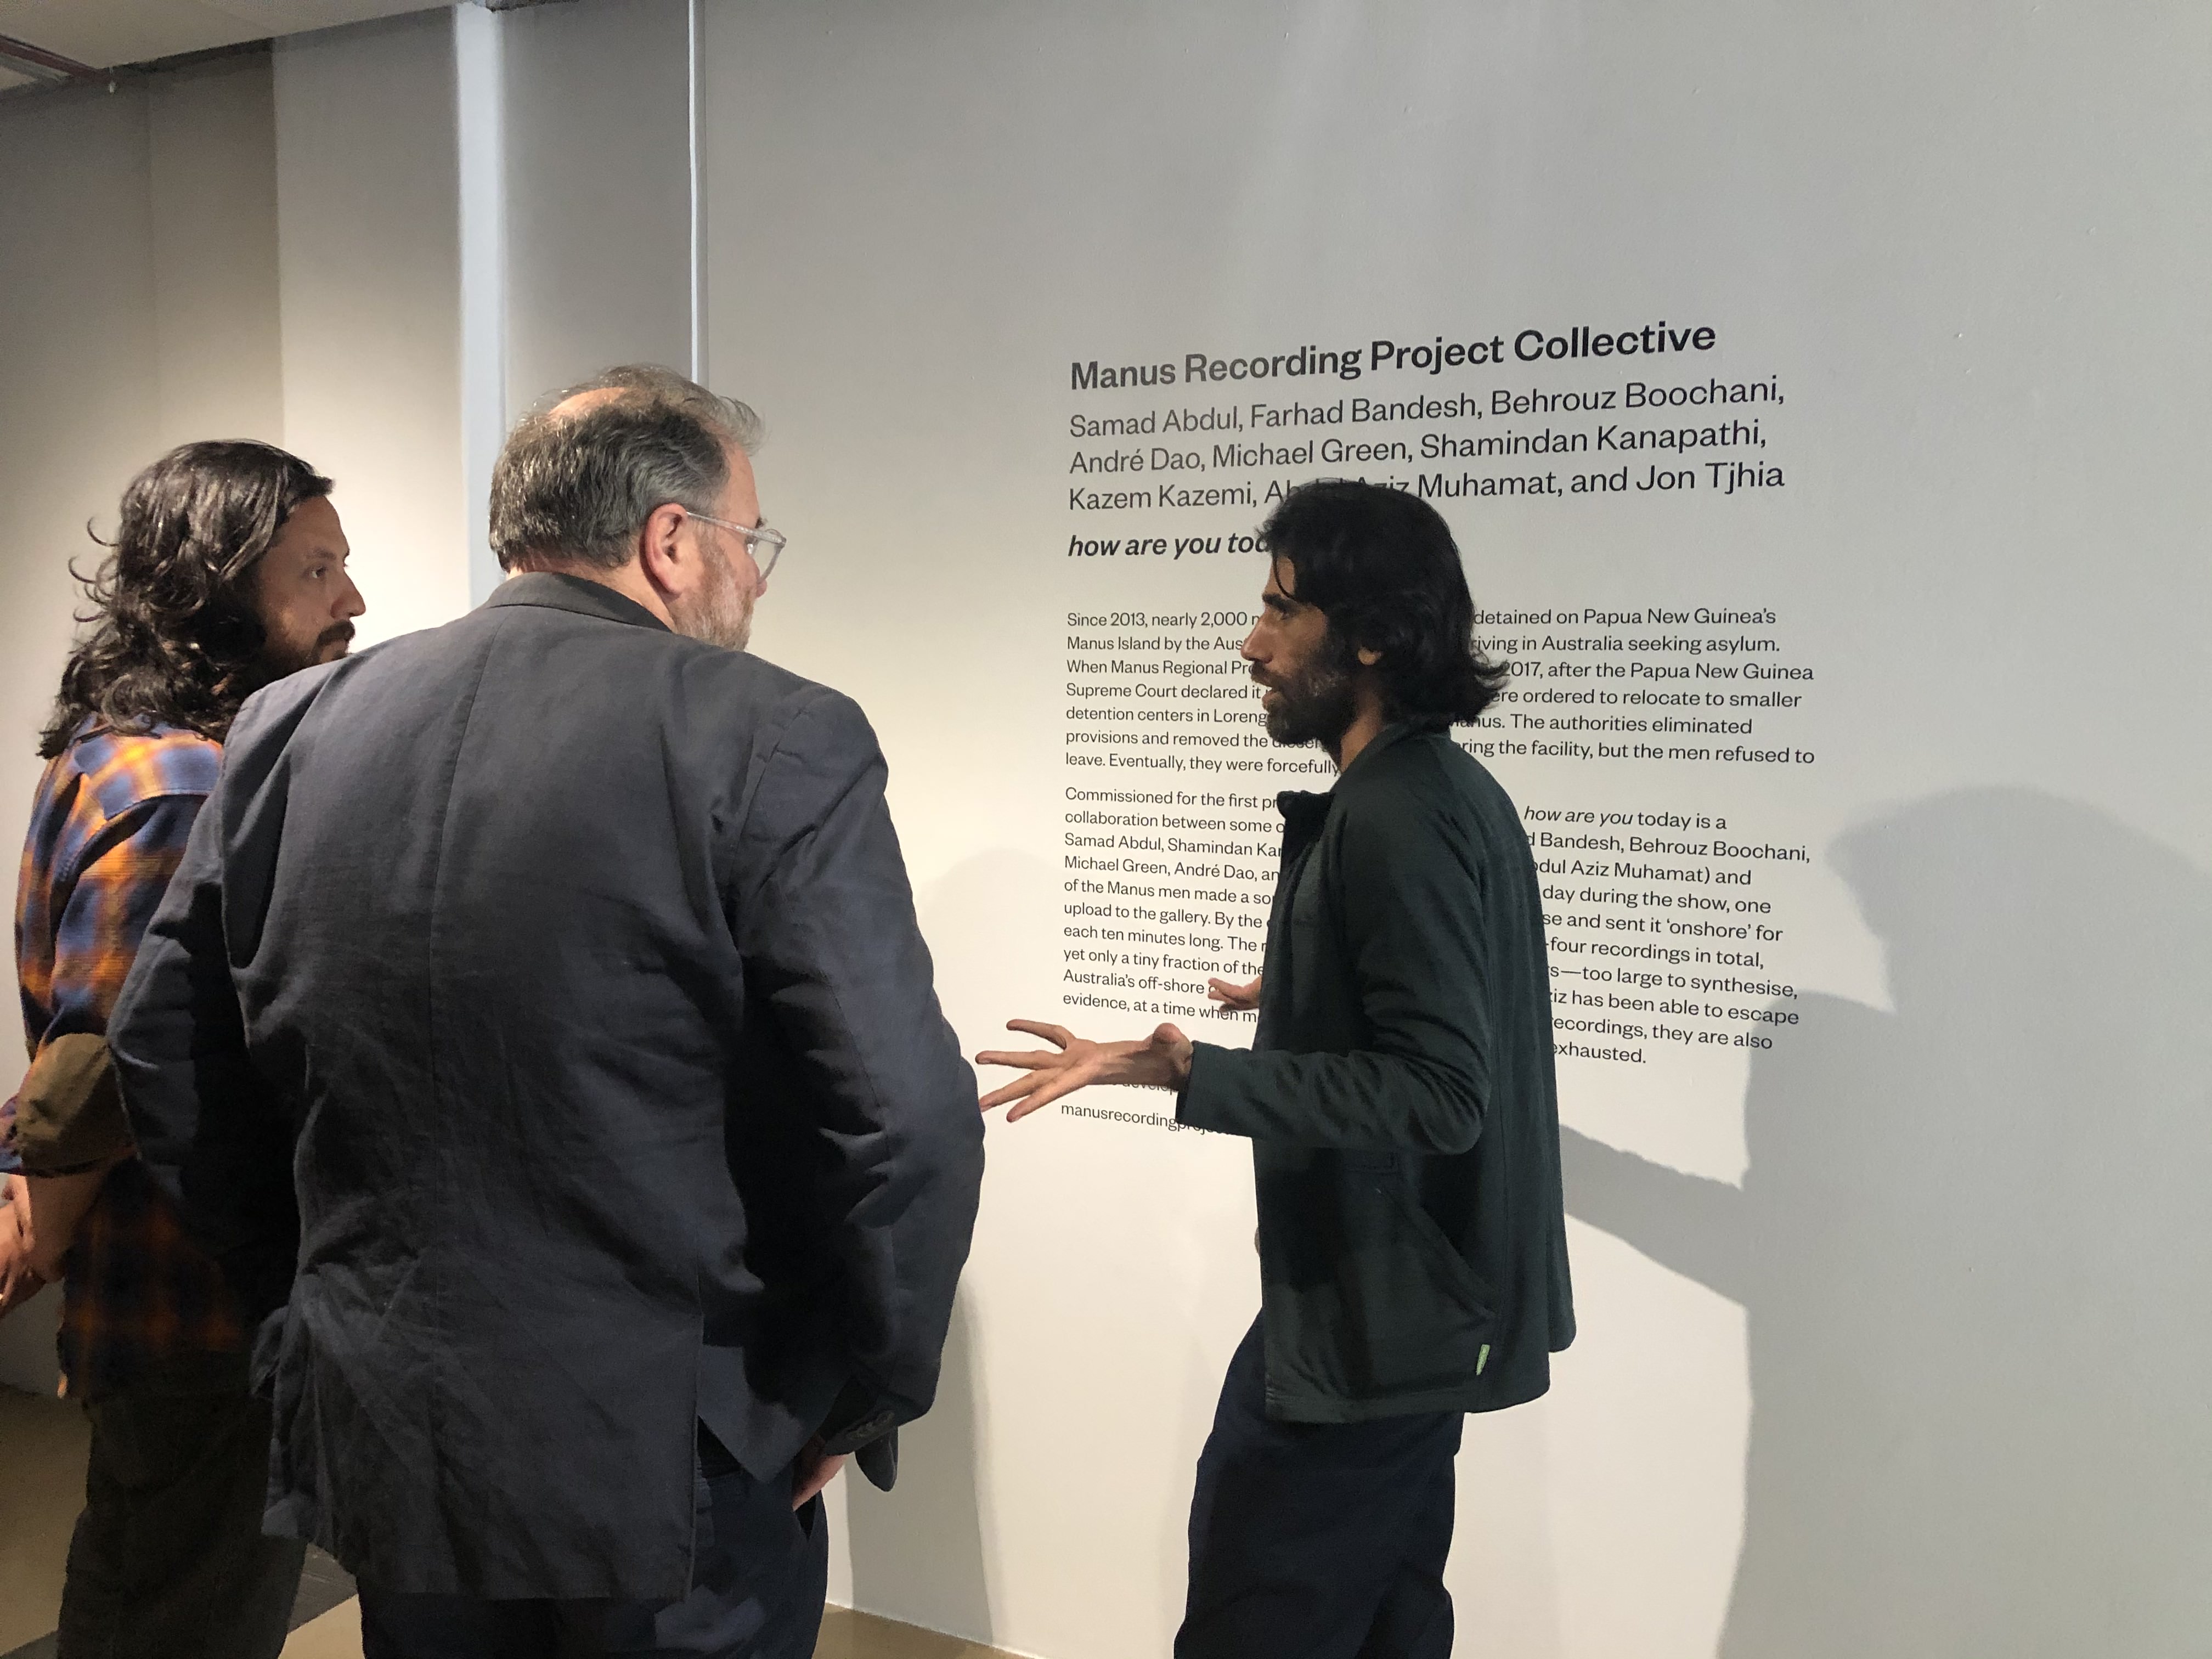 <p>Behrouz Boochani (right) with artist Bryan Philips and curator Robert  Leonard, next to the work <em>how are you today</em> by Manus Recording Project Collective, City Gallery Wellington, November 17, 2019.</p>